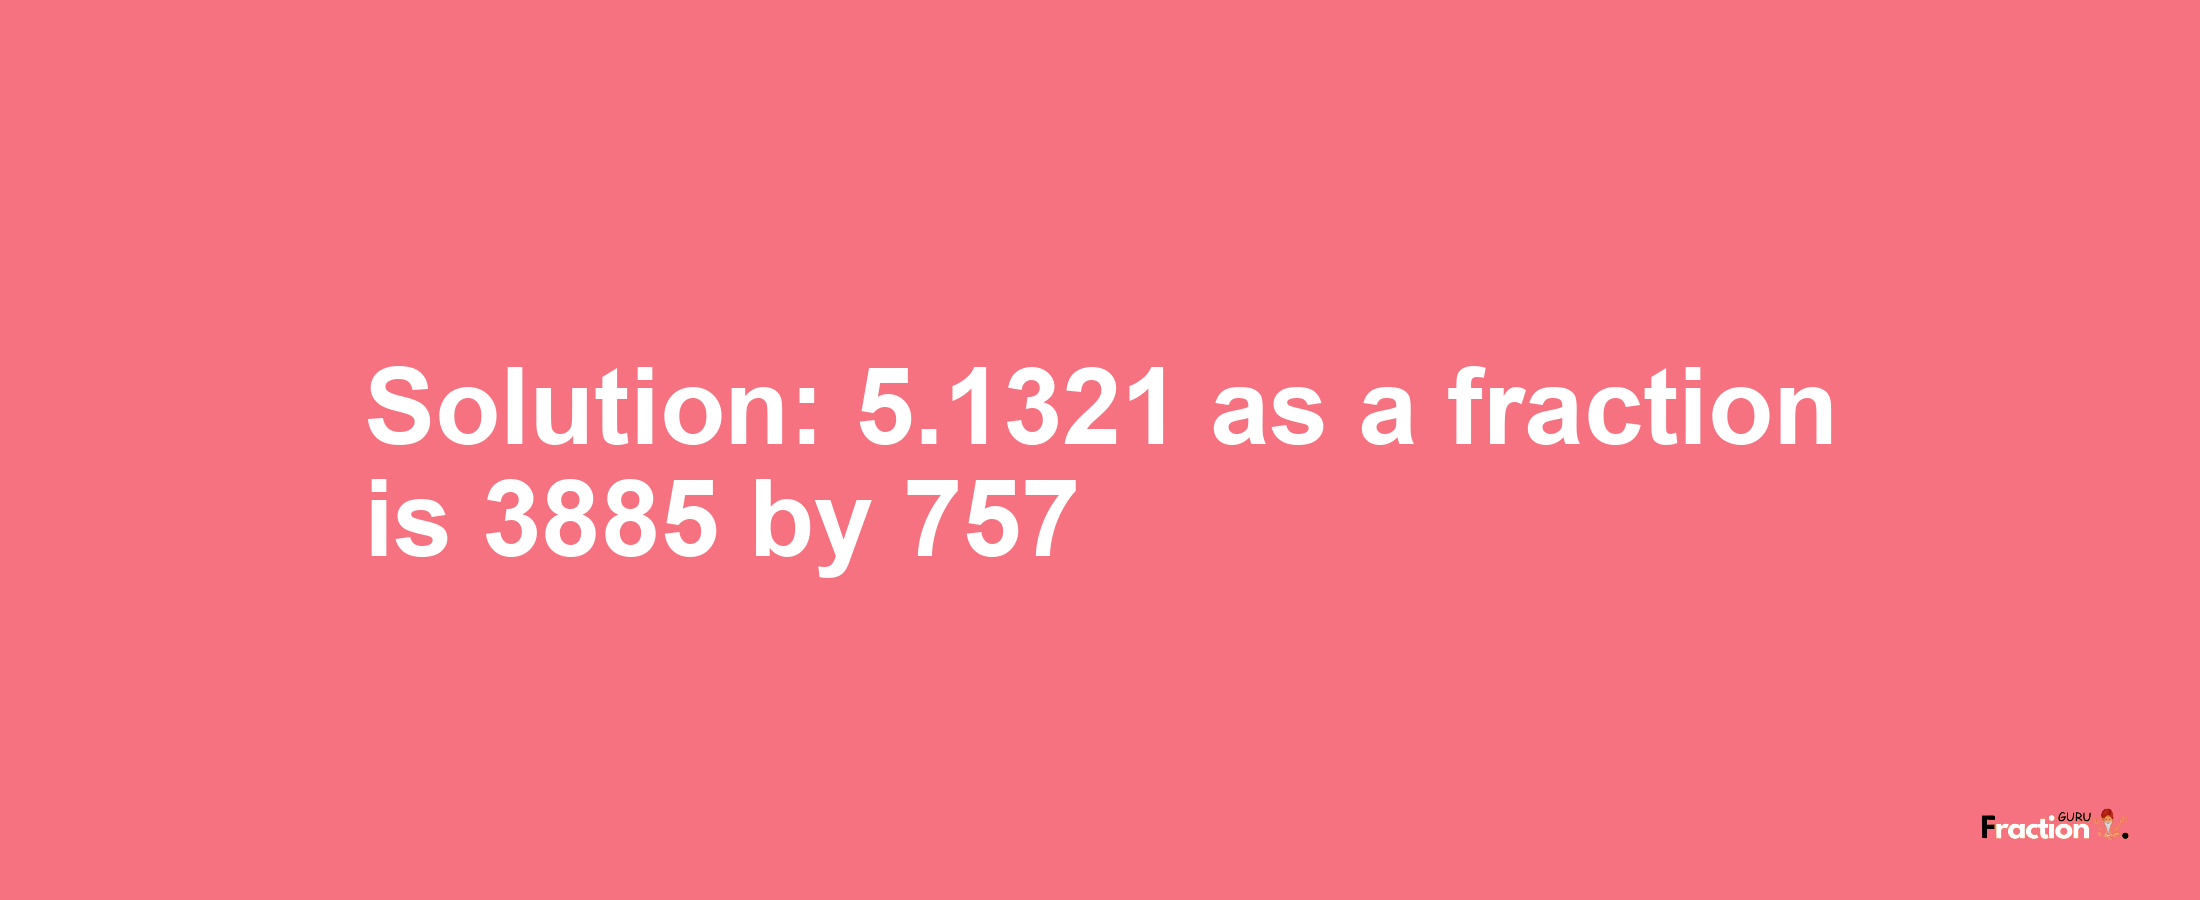 Solution:5.1321 as a fraction is 3885/757